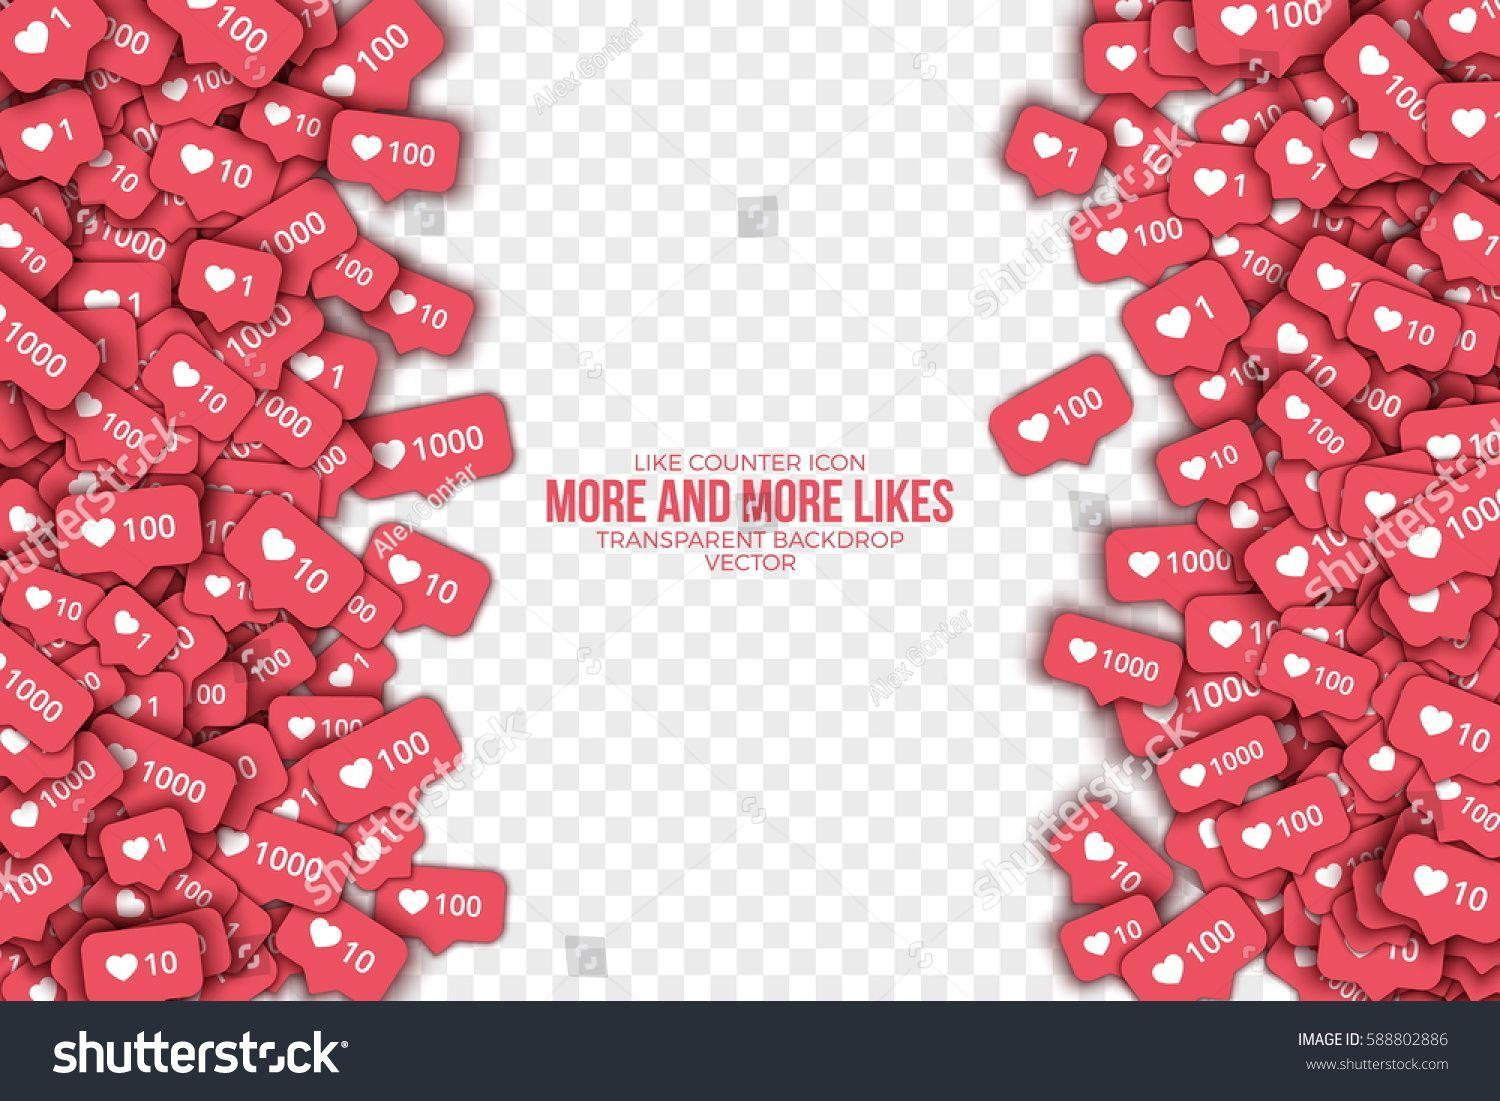 Red and White Internet Logo - Vector 3D Instagram Like Counter Icons Abstract Illustration | like ...